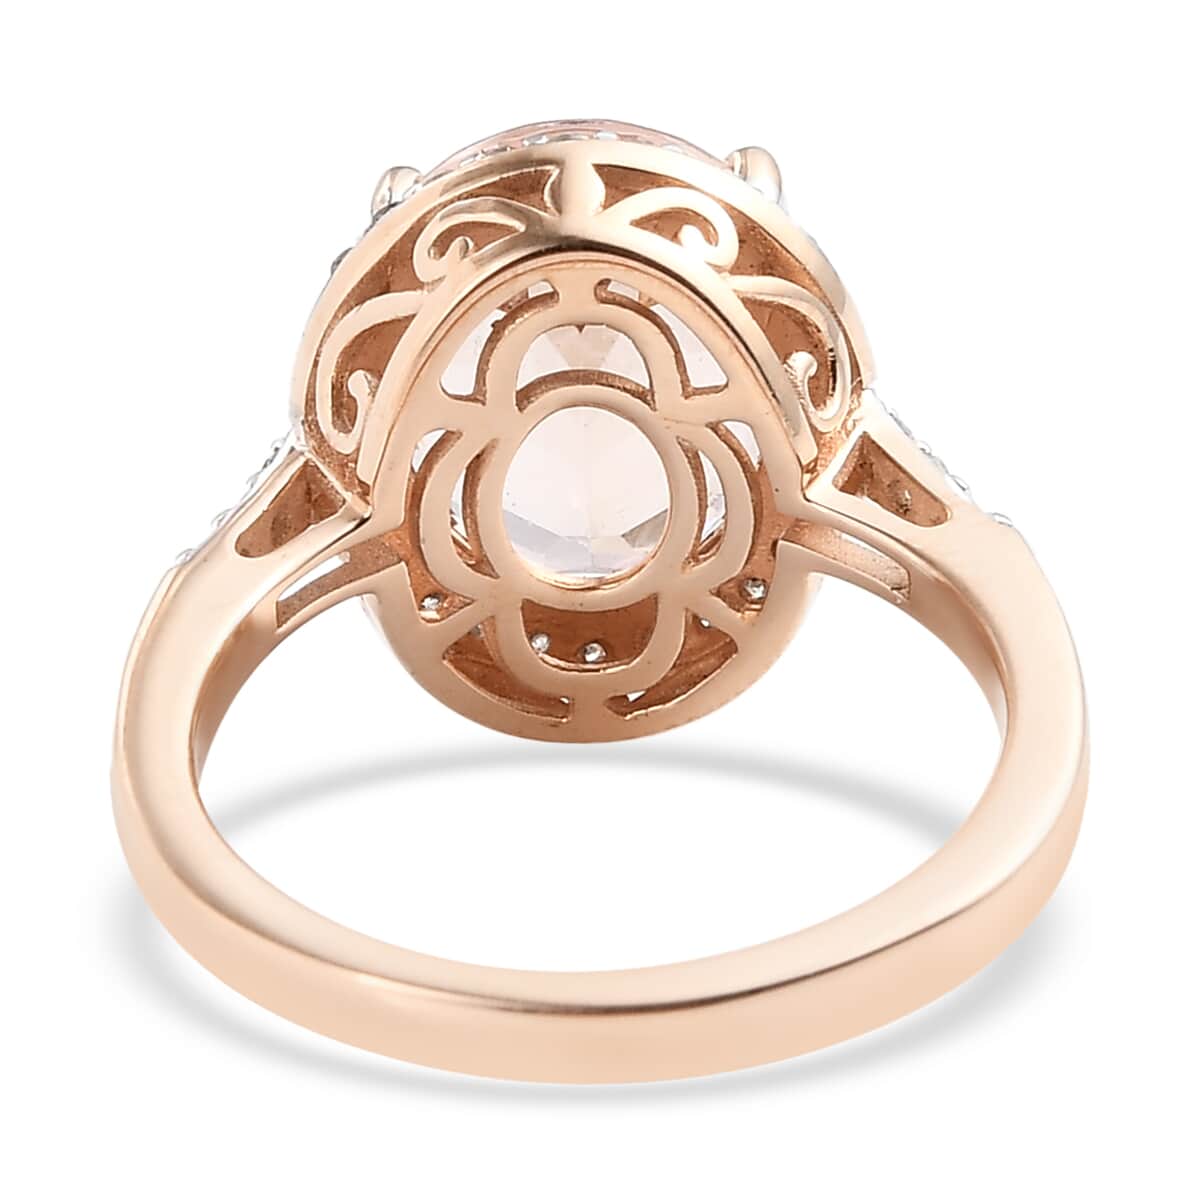 LUXORO 10K Rose Gold AAA Marropino Morganite and G-H I3 Diamond Halo Ring (Size 10.0) 3.60 Grams 4.15 ctw image number 4